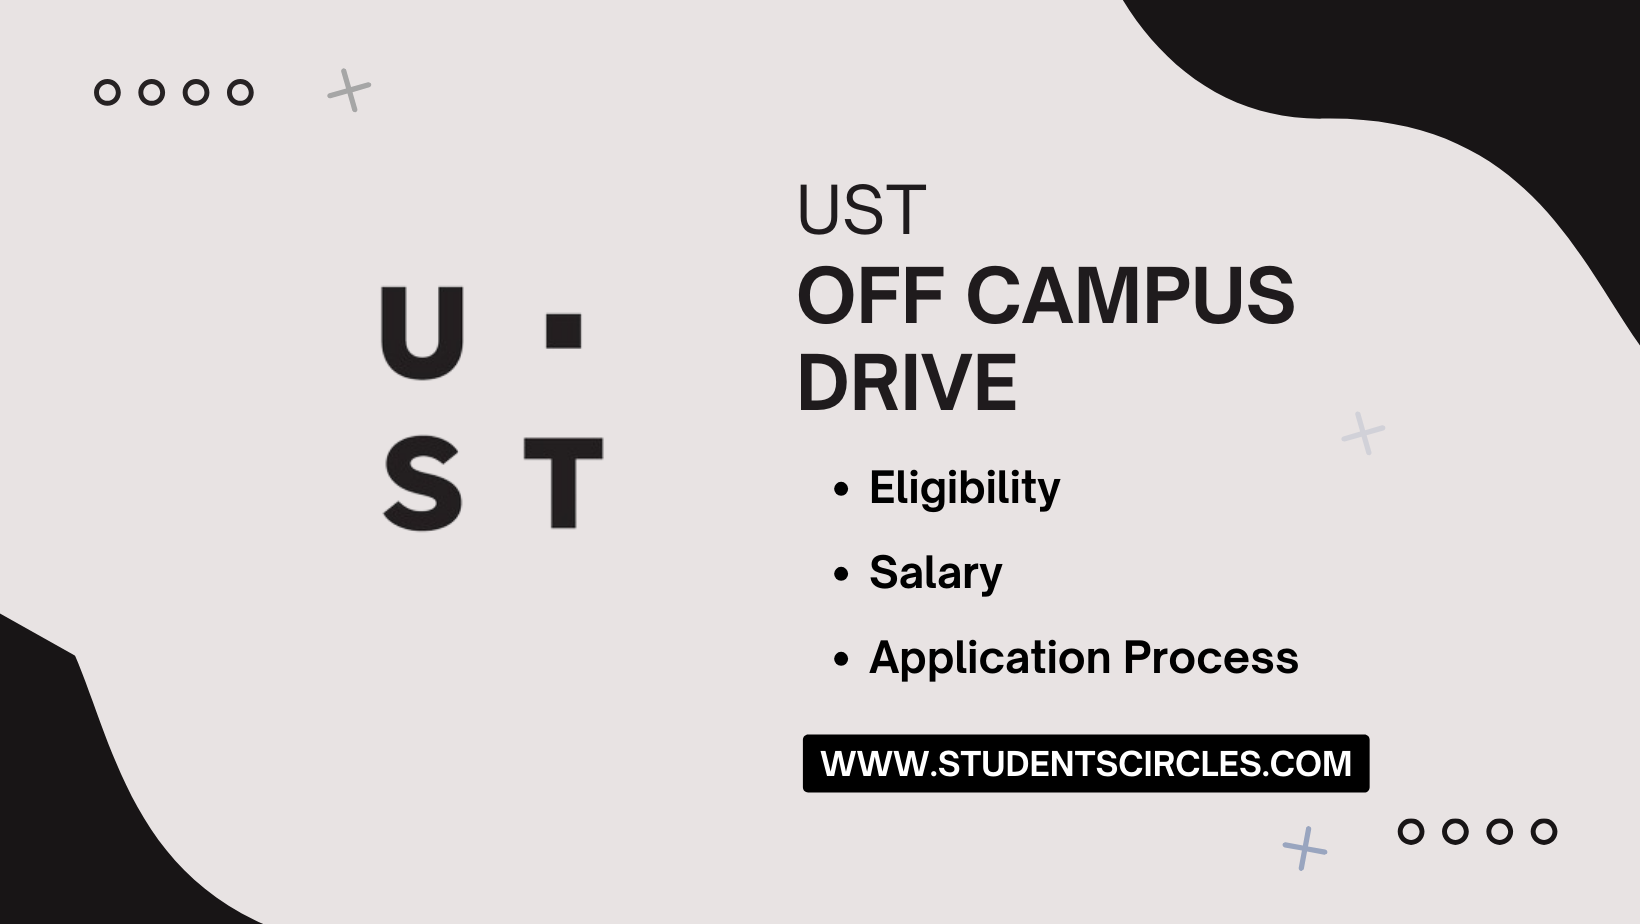 UST Off Campus Drive